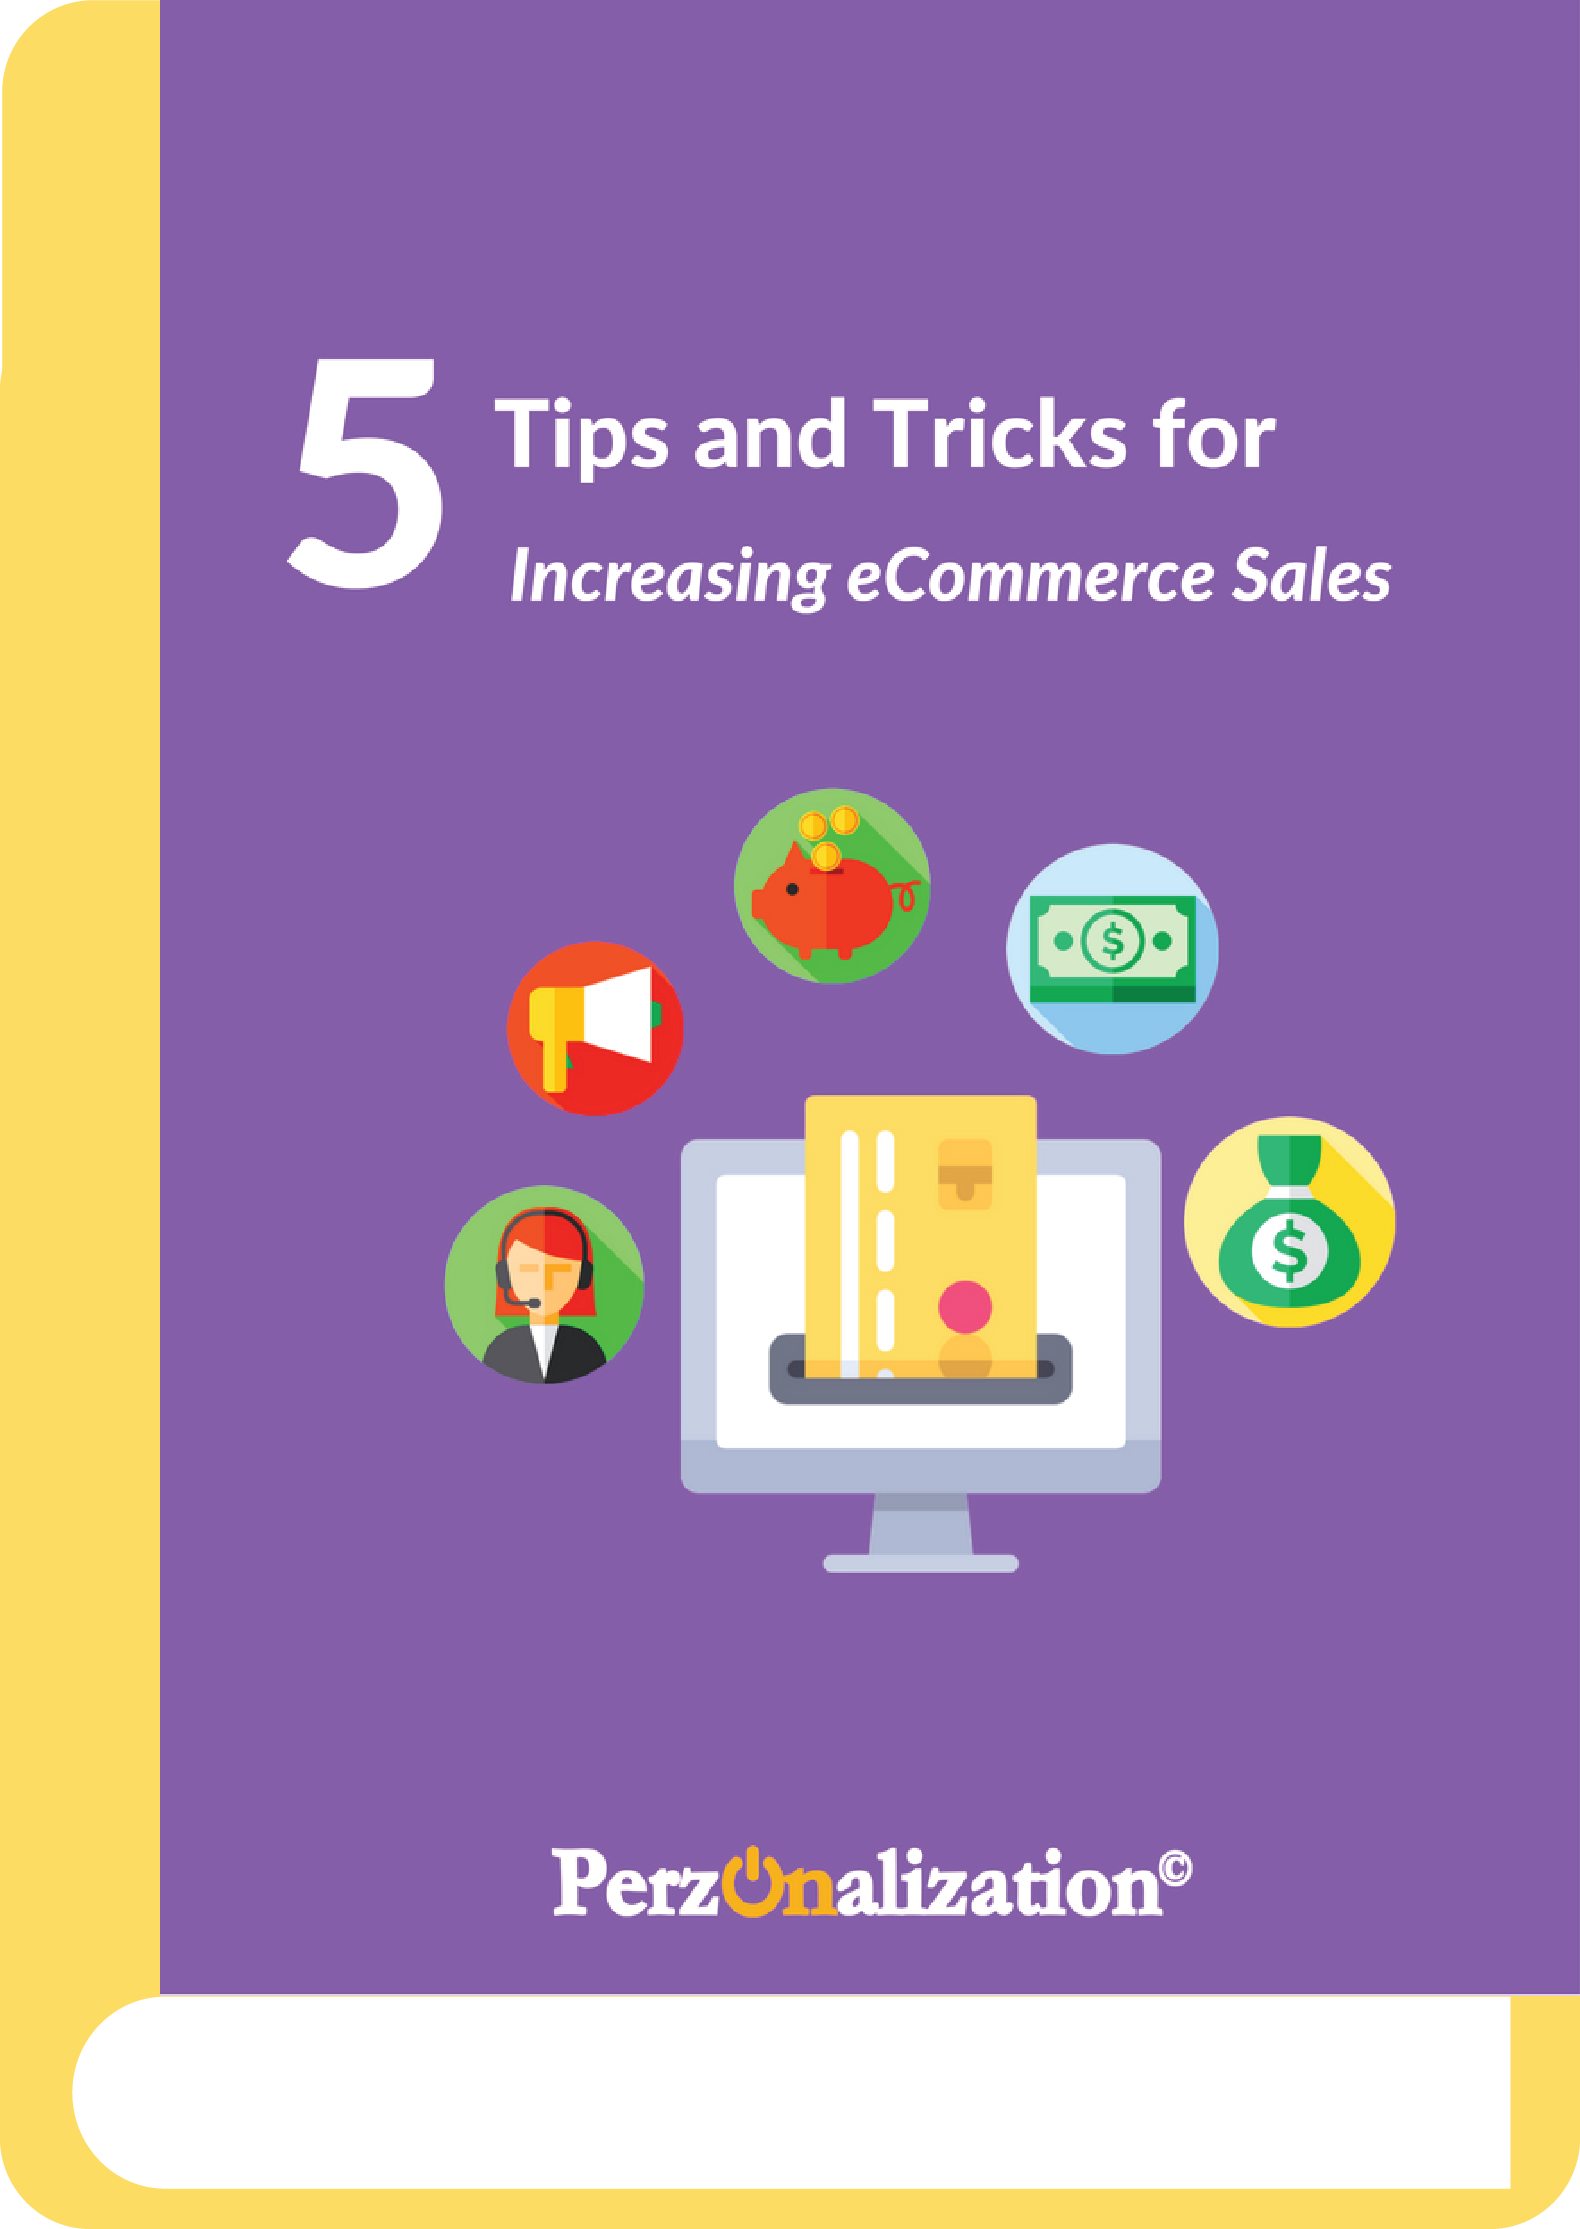 If you'd like to increase eCommerce sales, take a look at our handy eBook here. Try some of the tips discussed and be sure to bring some more conversions!